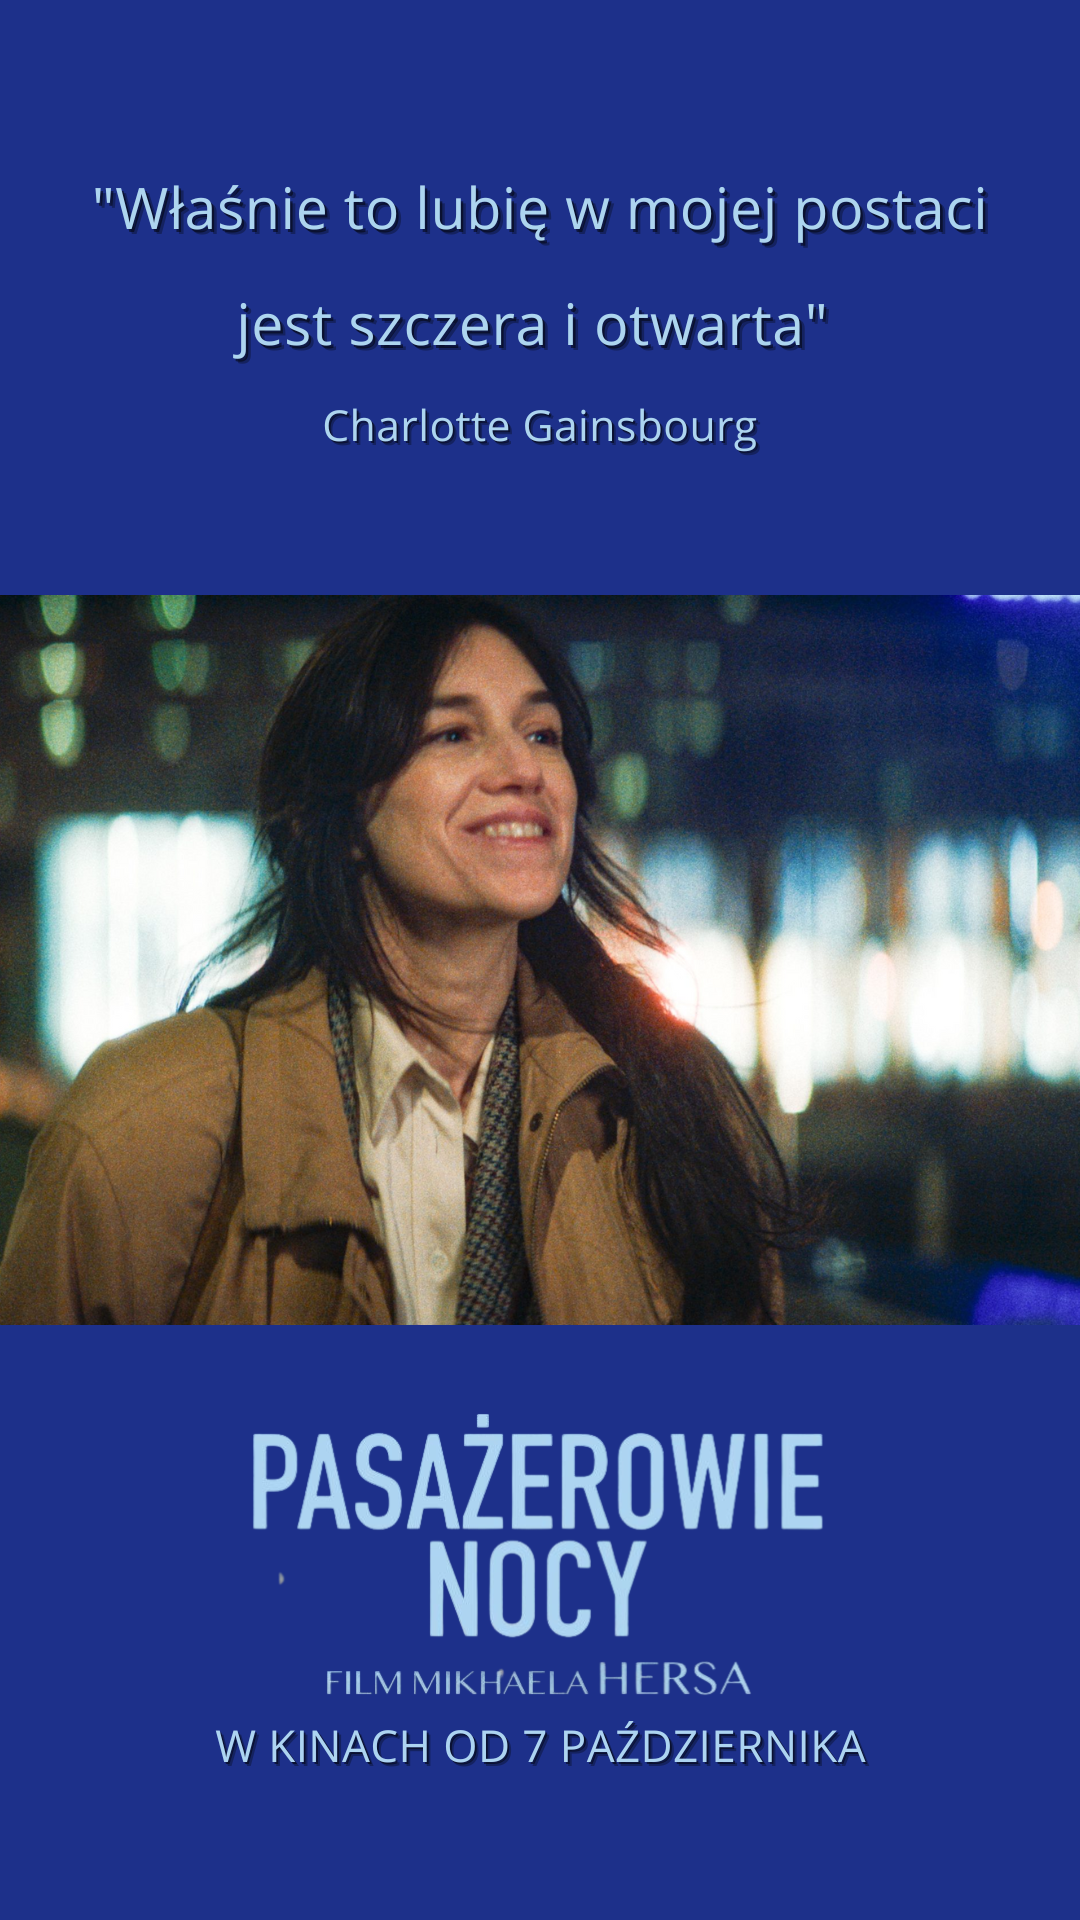 PASAZEROWIE NOCY_IG STORY_ CHARLOTTE GAINSBOURG_12